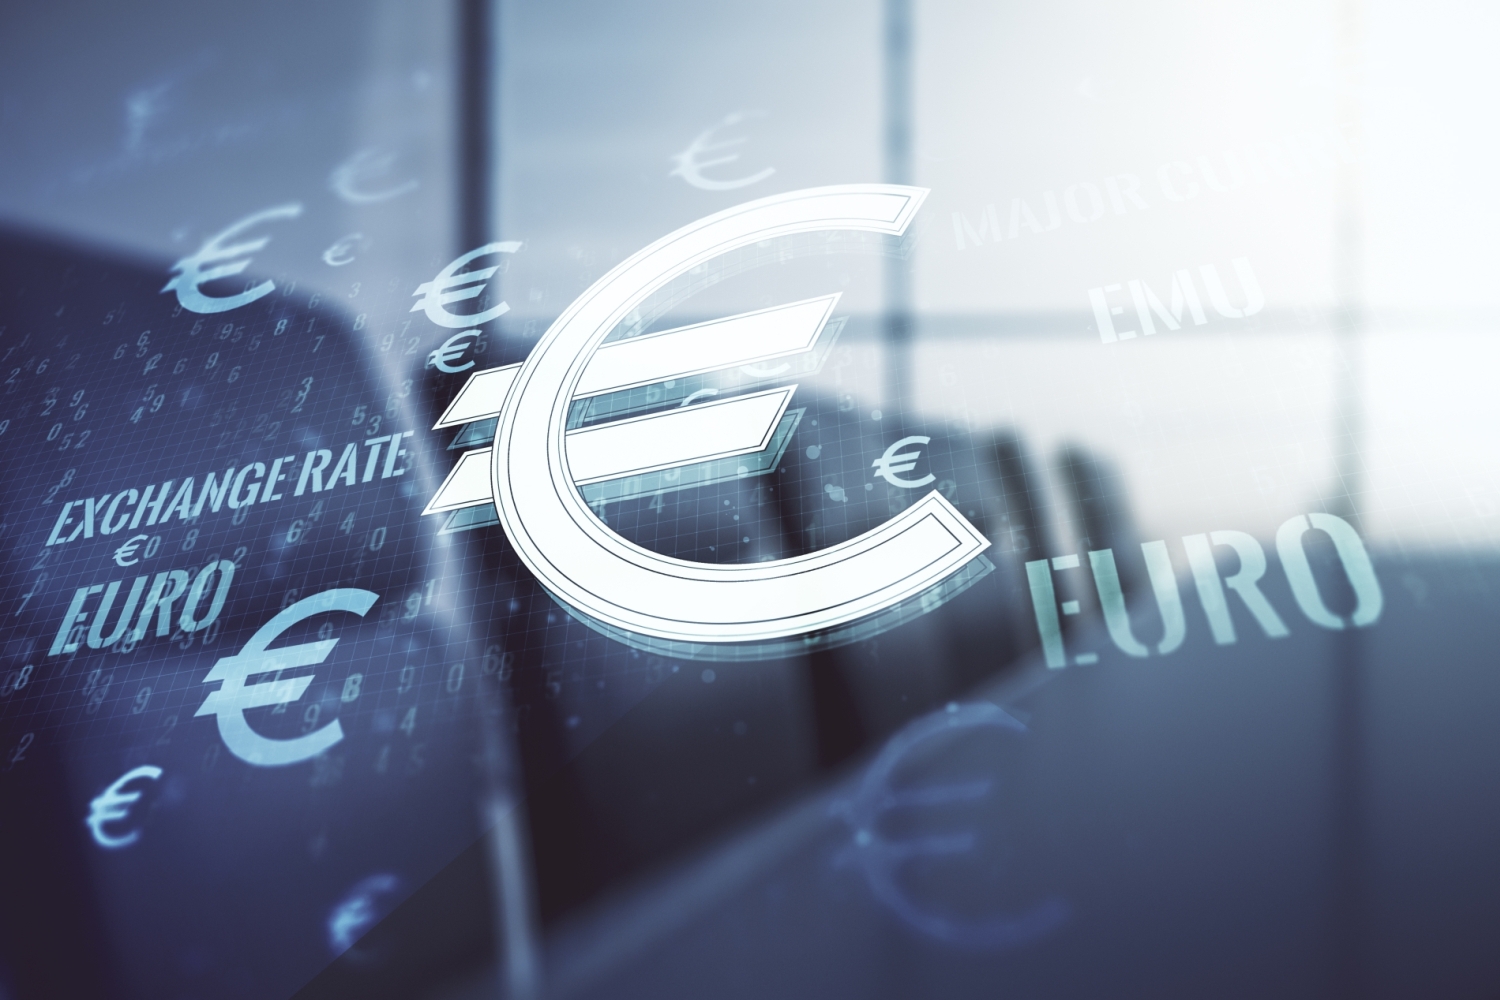 virtual-euro-symbols-illustration-modern-coworking-room-background-forex-currency-concept-multiexposure